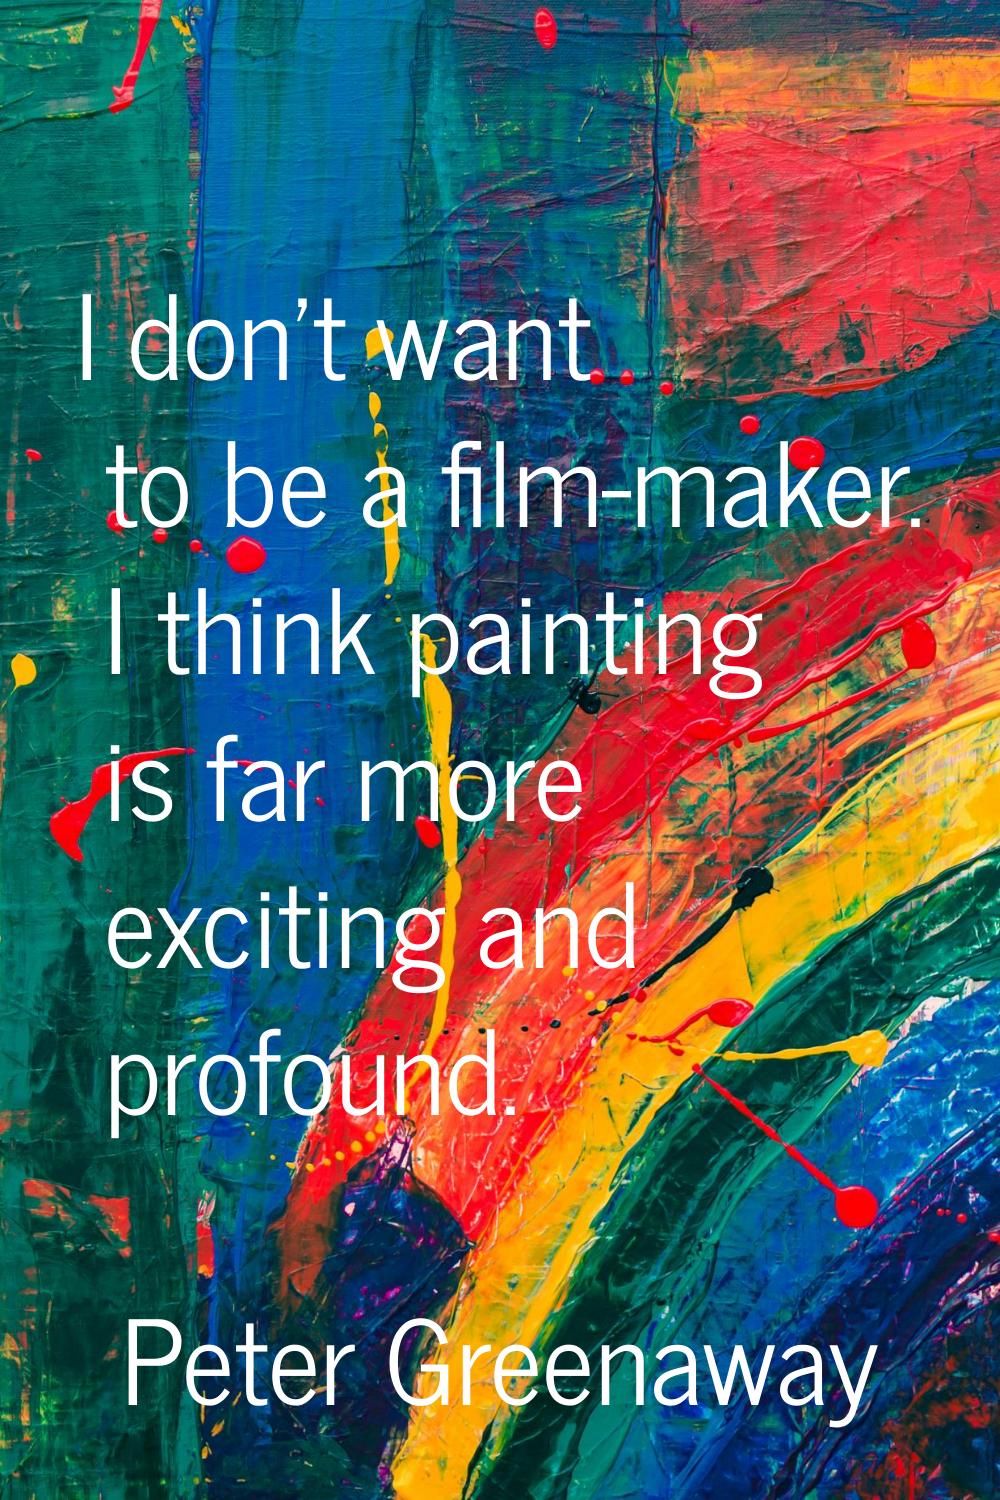 I don't want to be a film-maker. I think painting is far more exciting and profound.